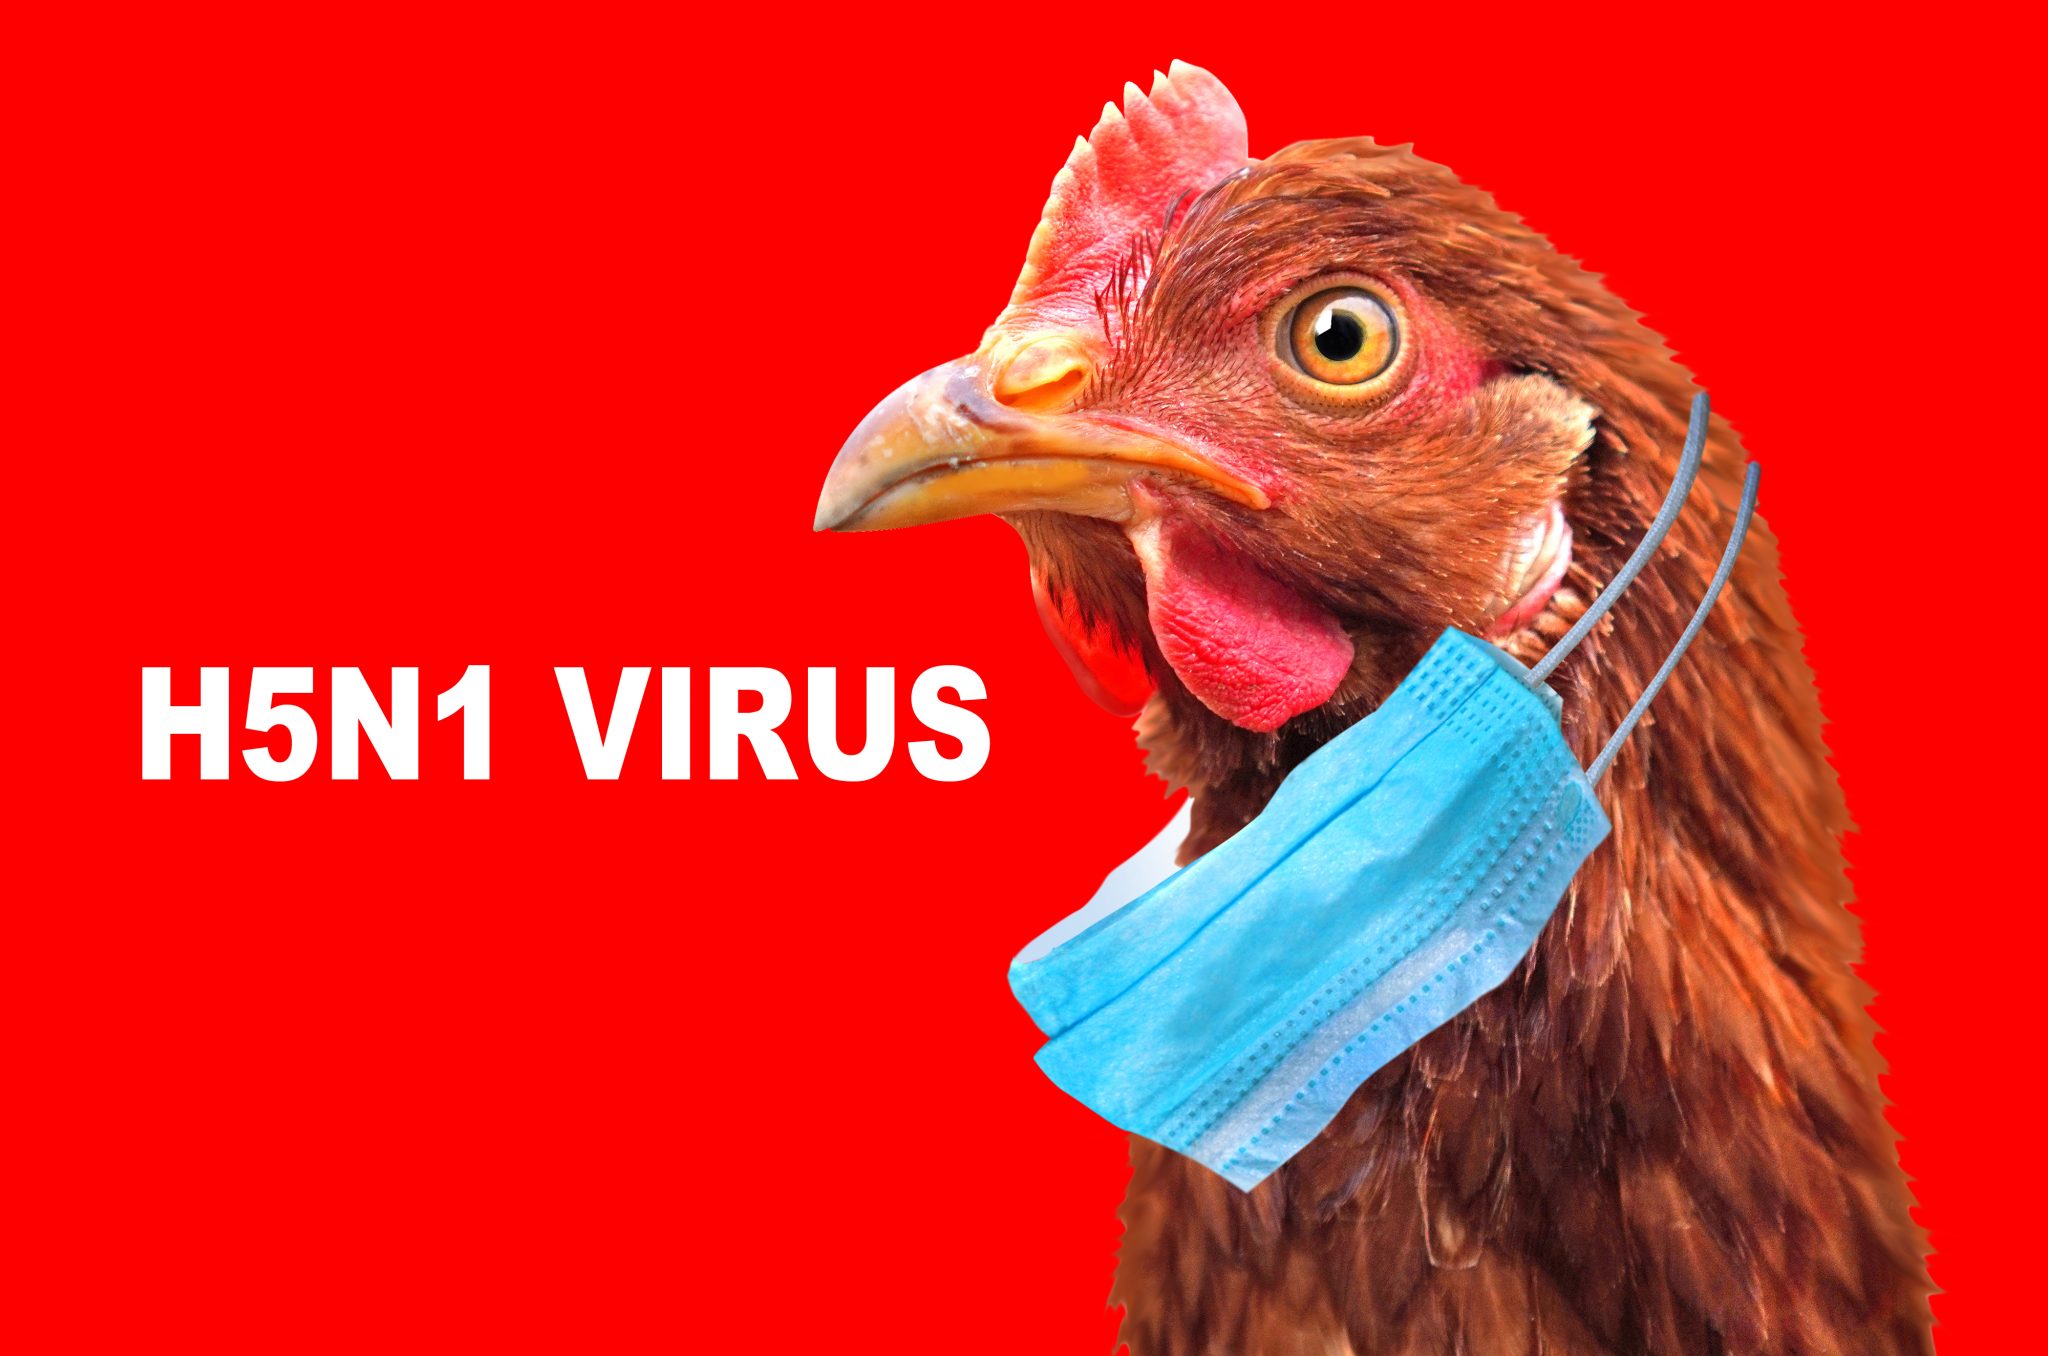 Another Bird flu outbreak confirmed this time in Derbyshire